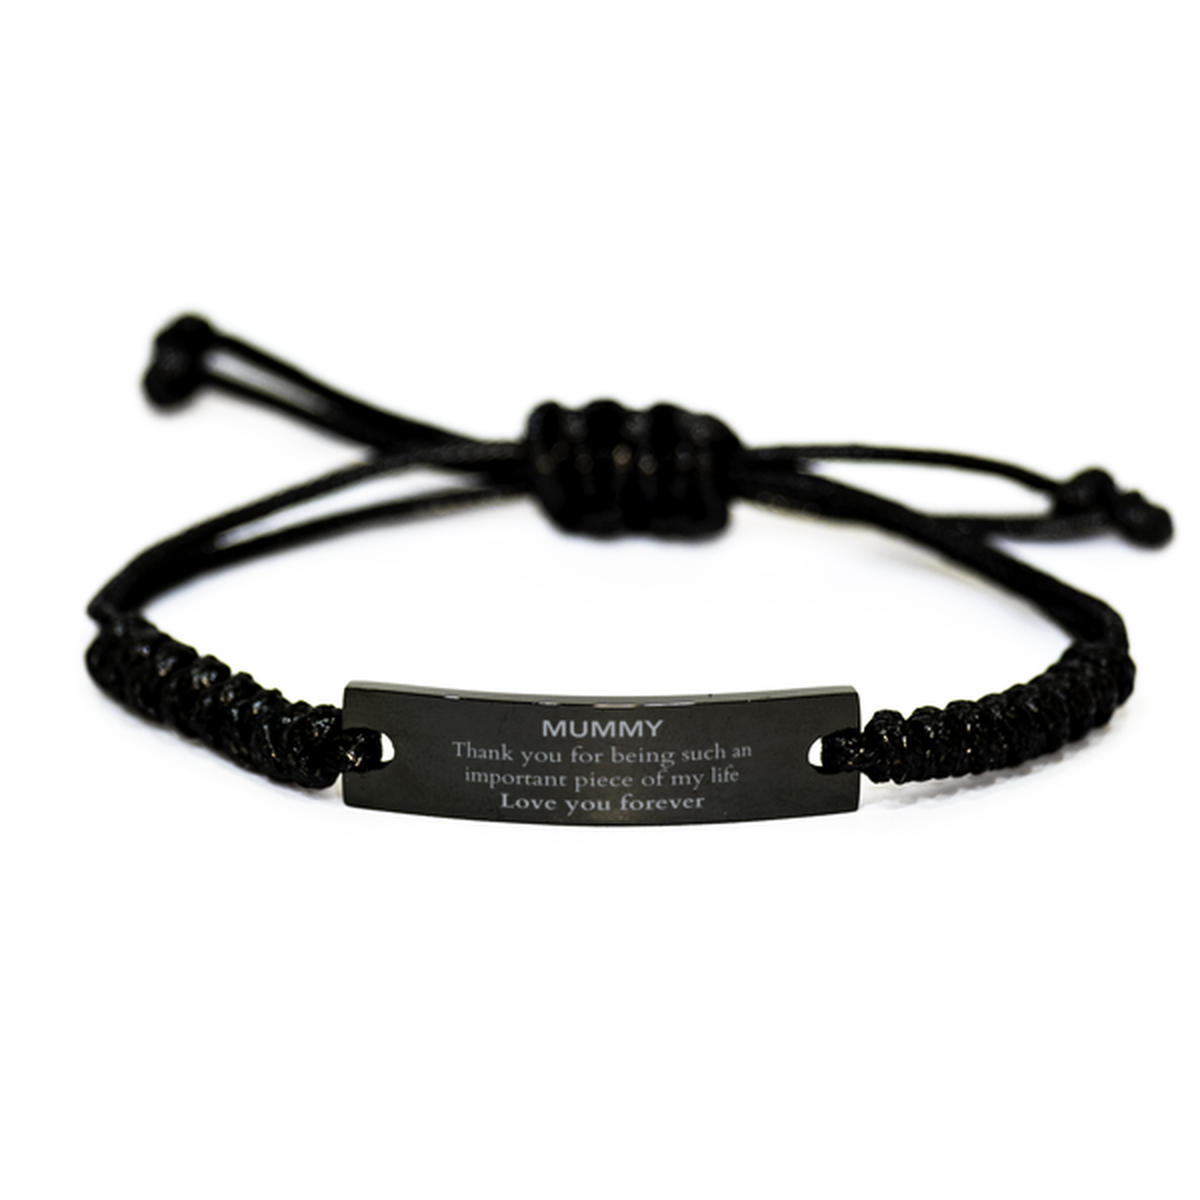 Appropriate Mummy Black Rope Bracelet Epic Birthday Gifts for Mummy Thank you for being such an important piece of my life Mummy Christmas Mothers Fathers Day